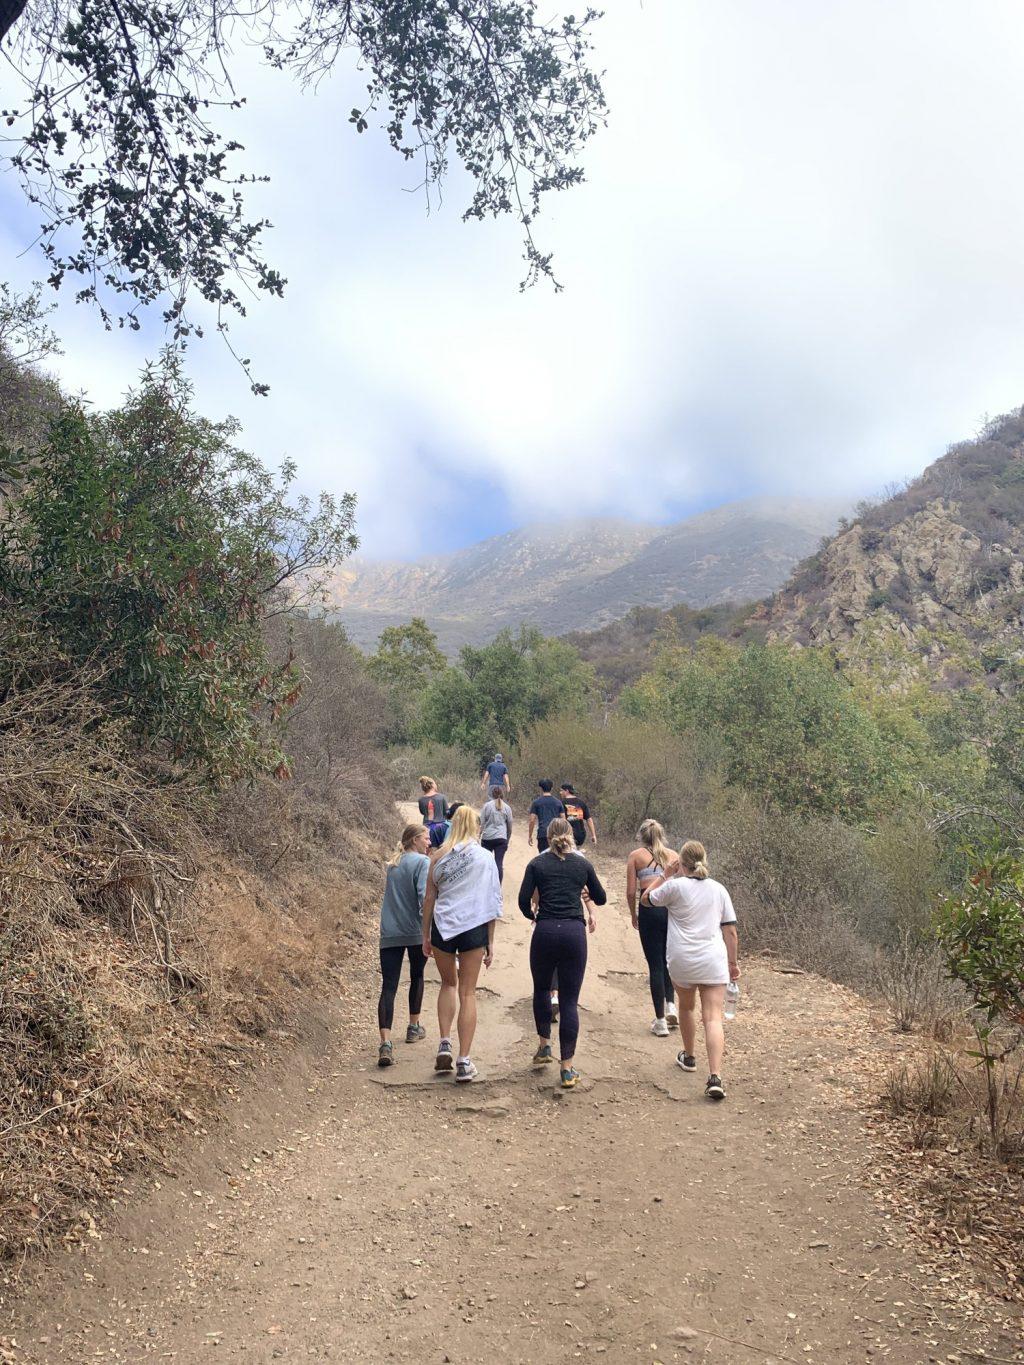 Students walk together on the Solstice Canyon trail for the Seaver 200 Faith and Hiking group fall semester. The group gathered for weekly hikes to talk about their faith. Photo courtesy of Falon Barton